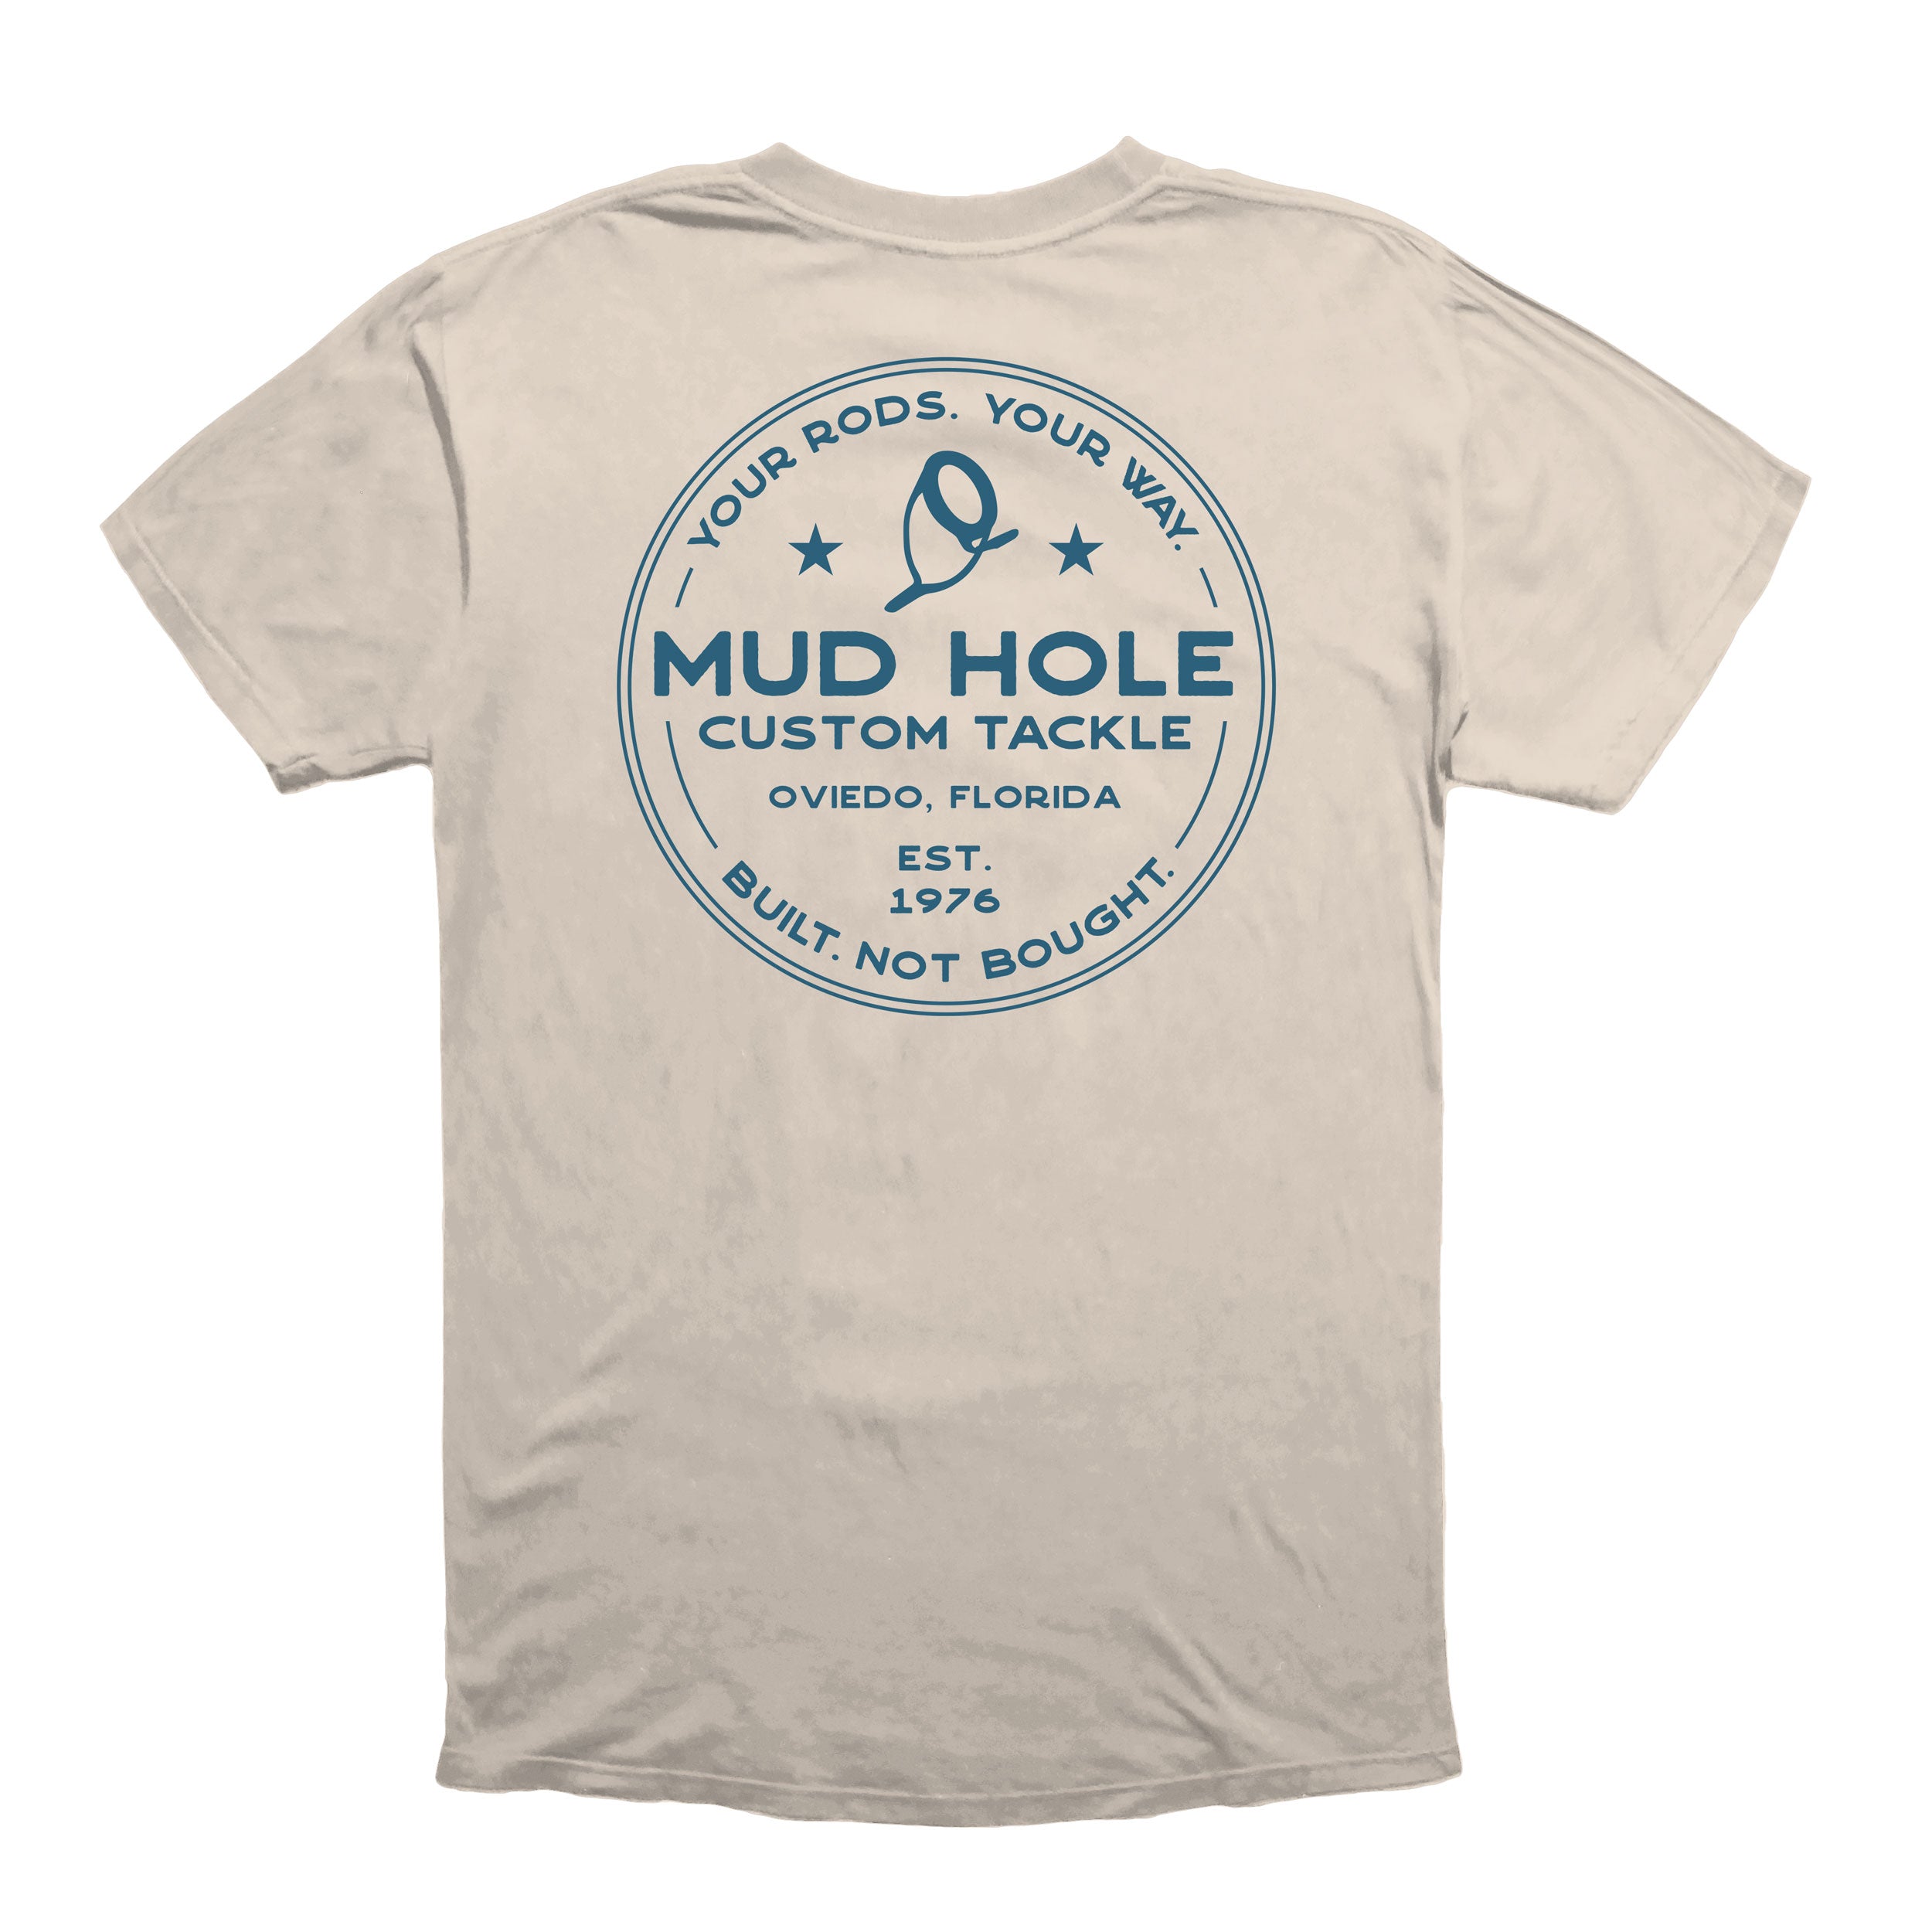 Mud Hole Your Rods Your Way T-Shirt